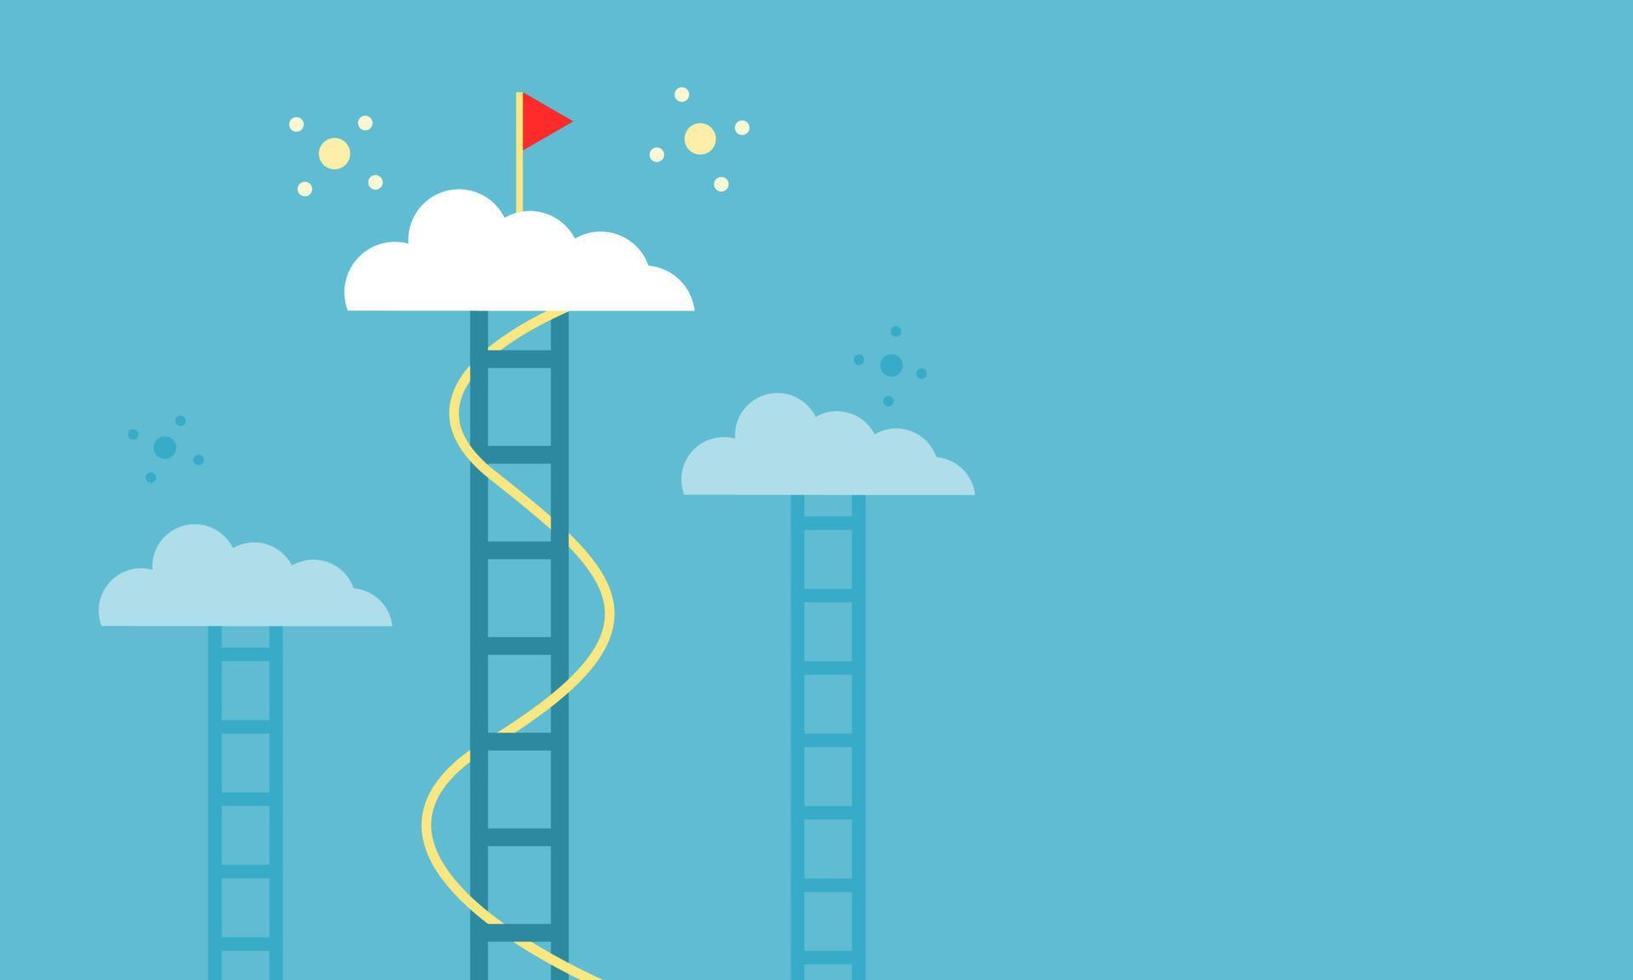 Stairs business step to red flag goal success on white cloud flat vector design.